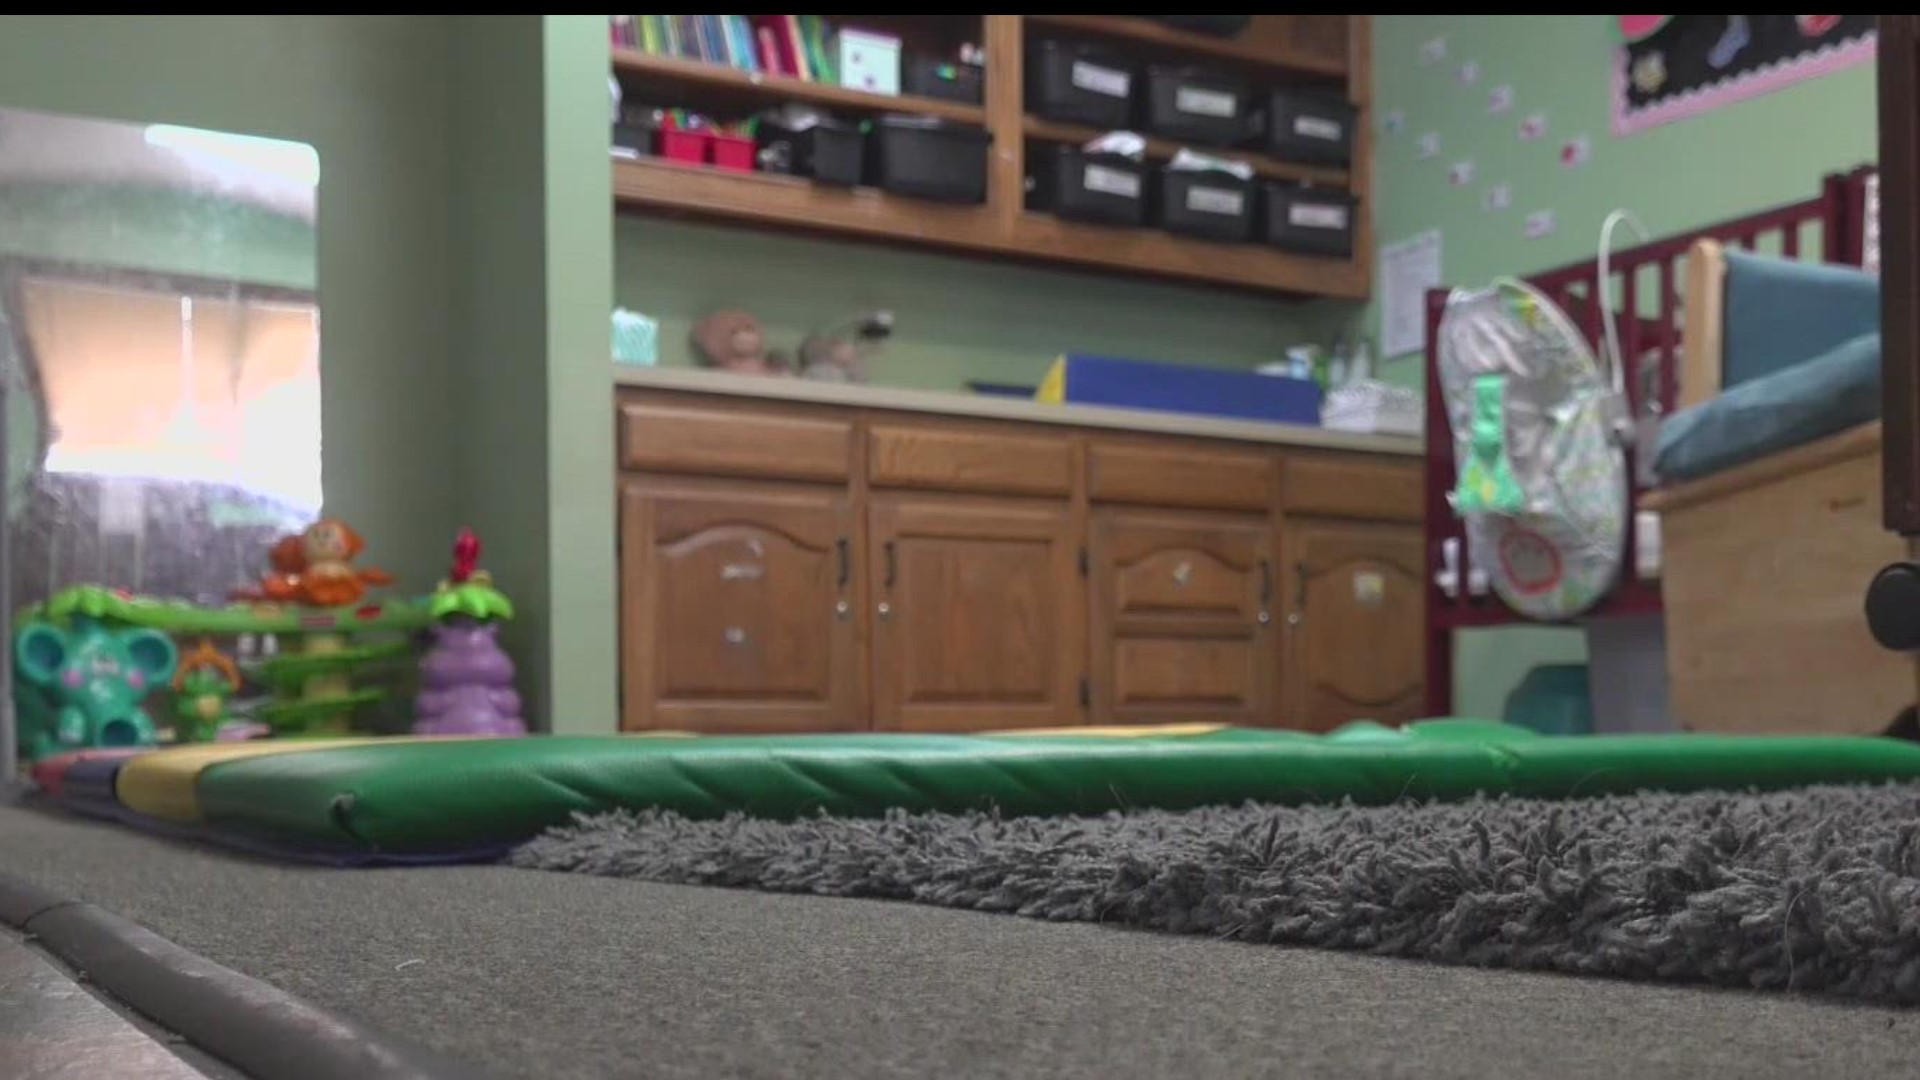 The Peas in a Pod Daycare Learning Center shared extended ways to help parents struggling with daycare tuition costs.